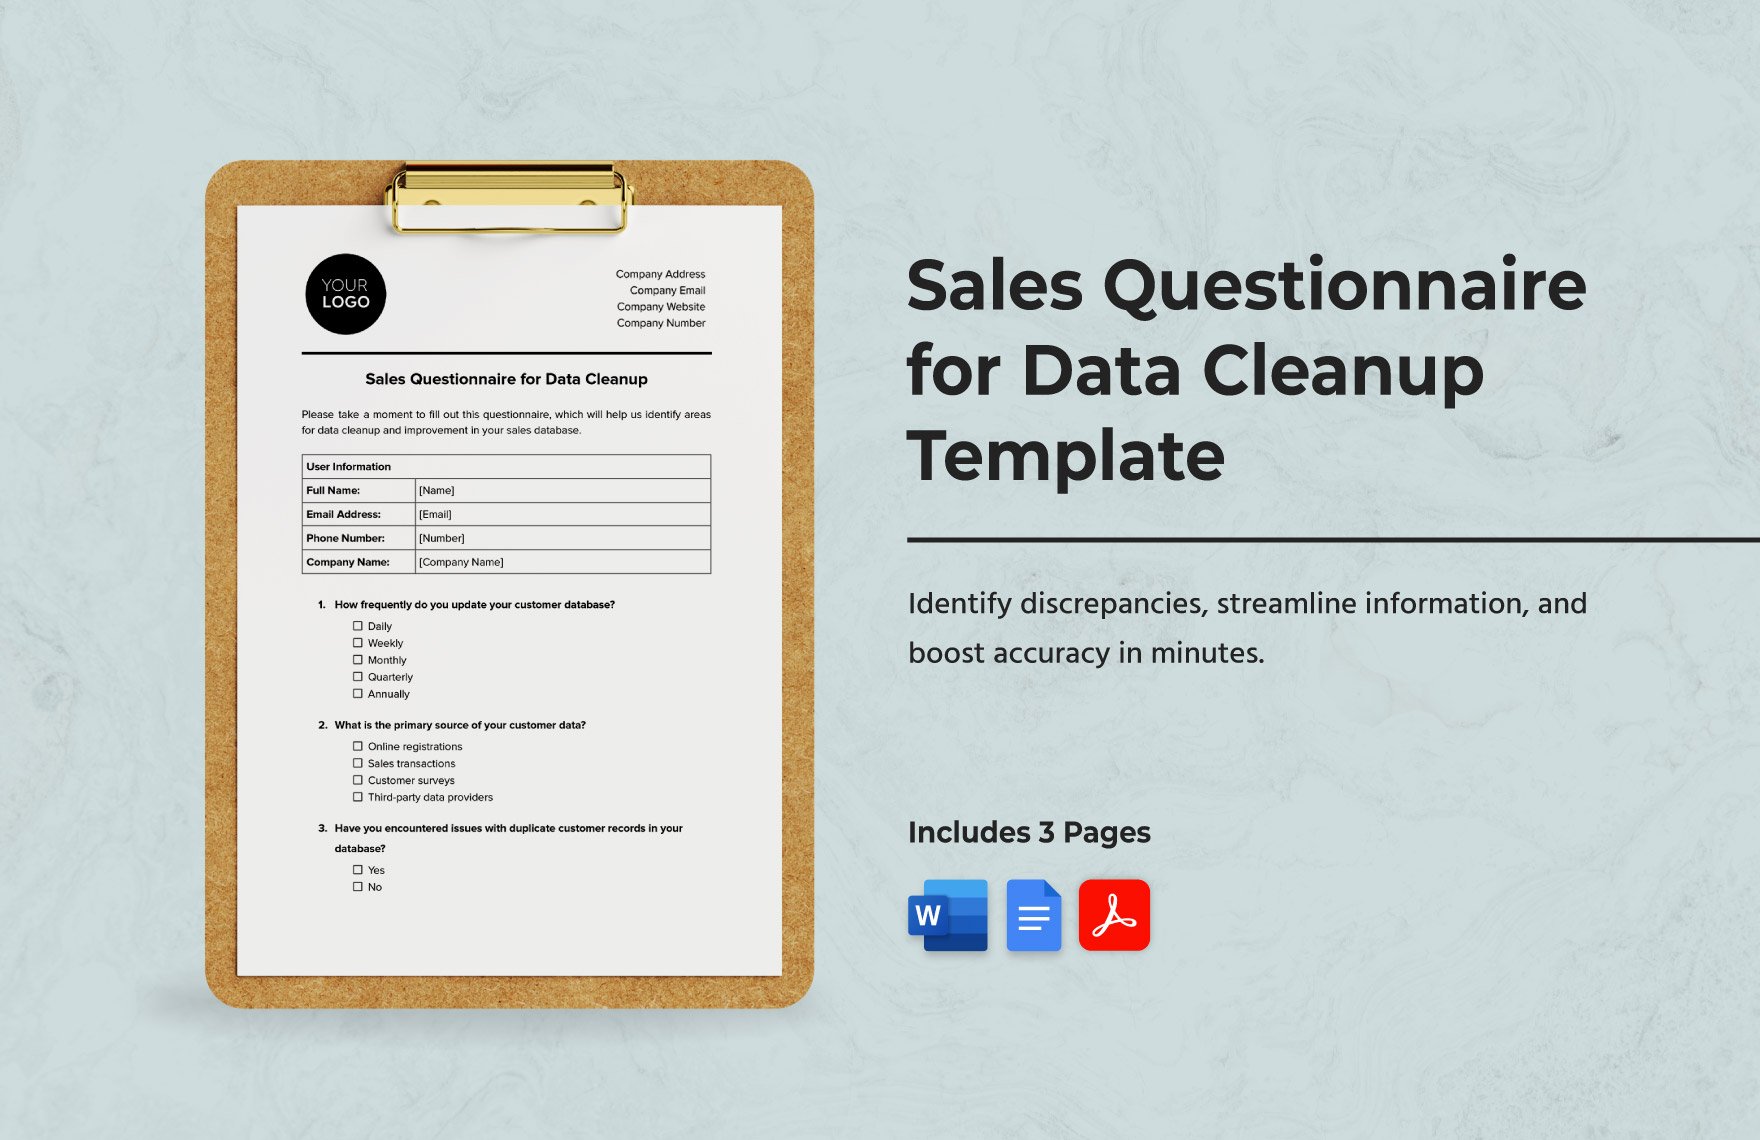 Sales Questionnaire for Data Cleanup Template